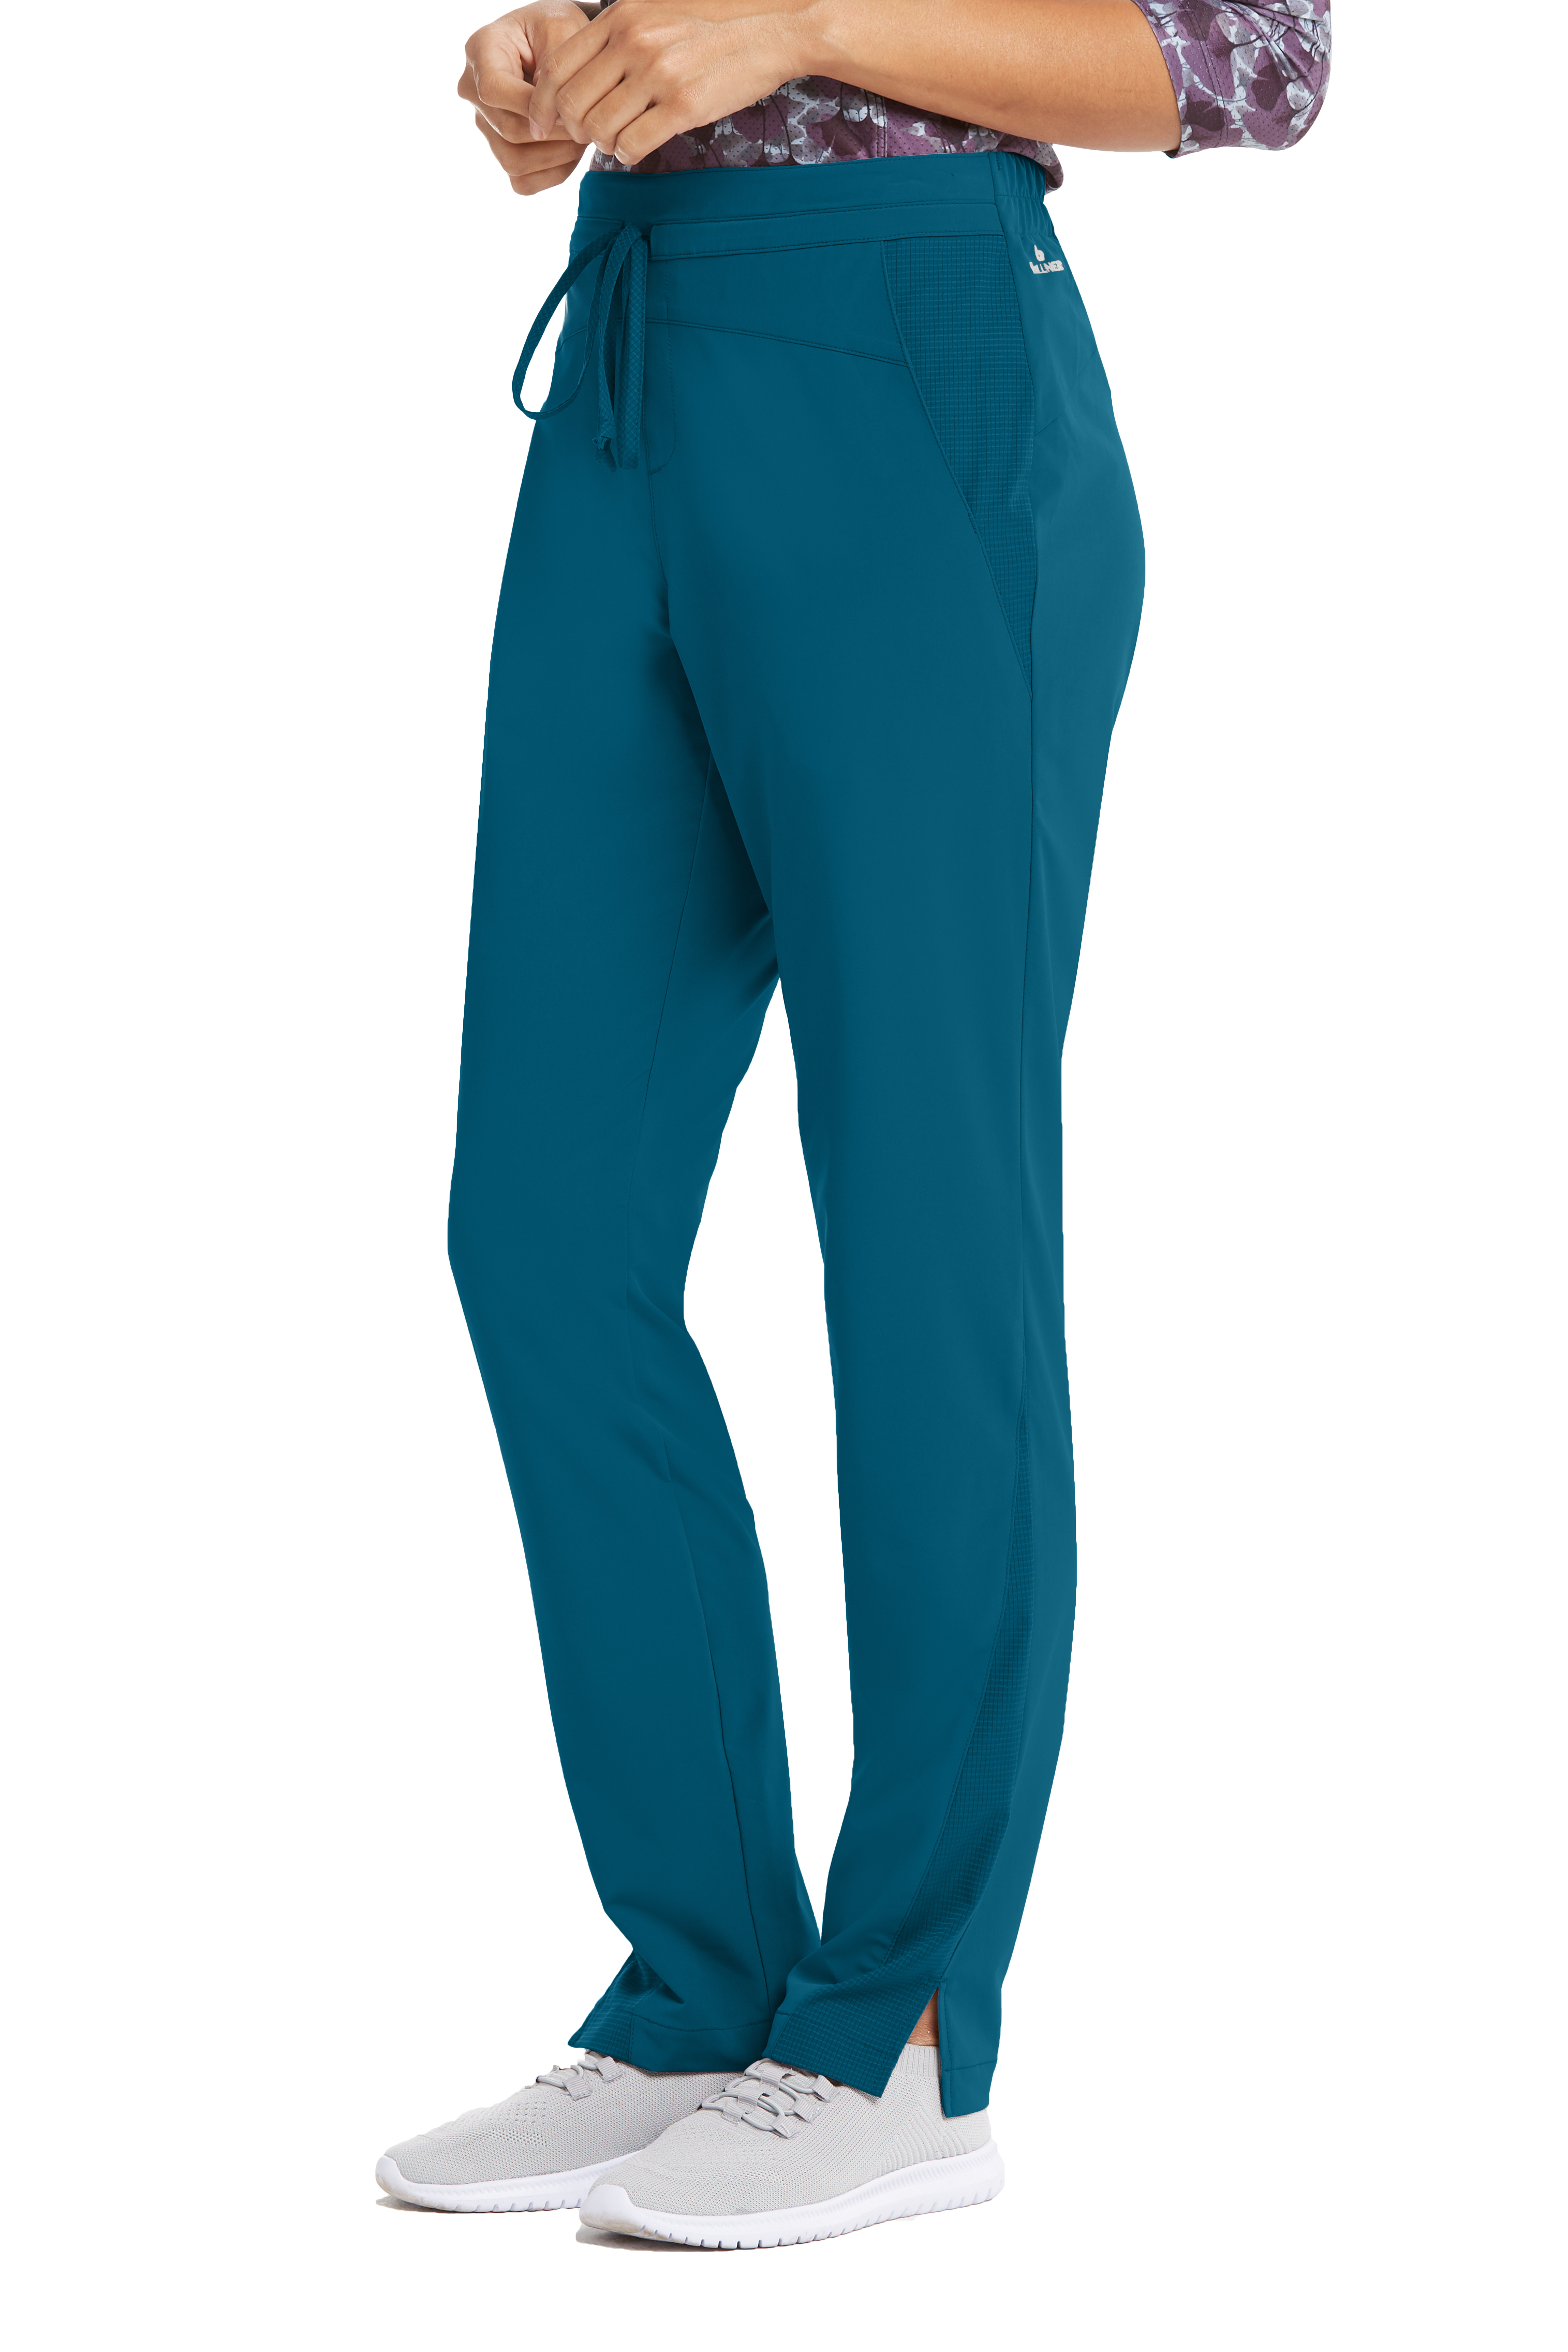 Barco Wellness Eclipse Pant-